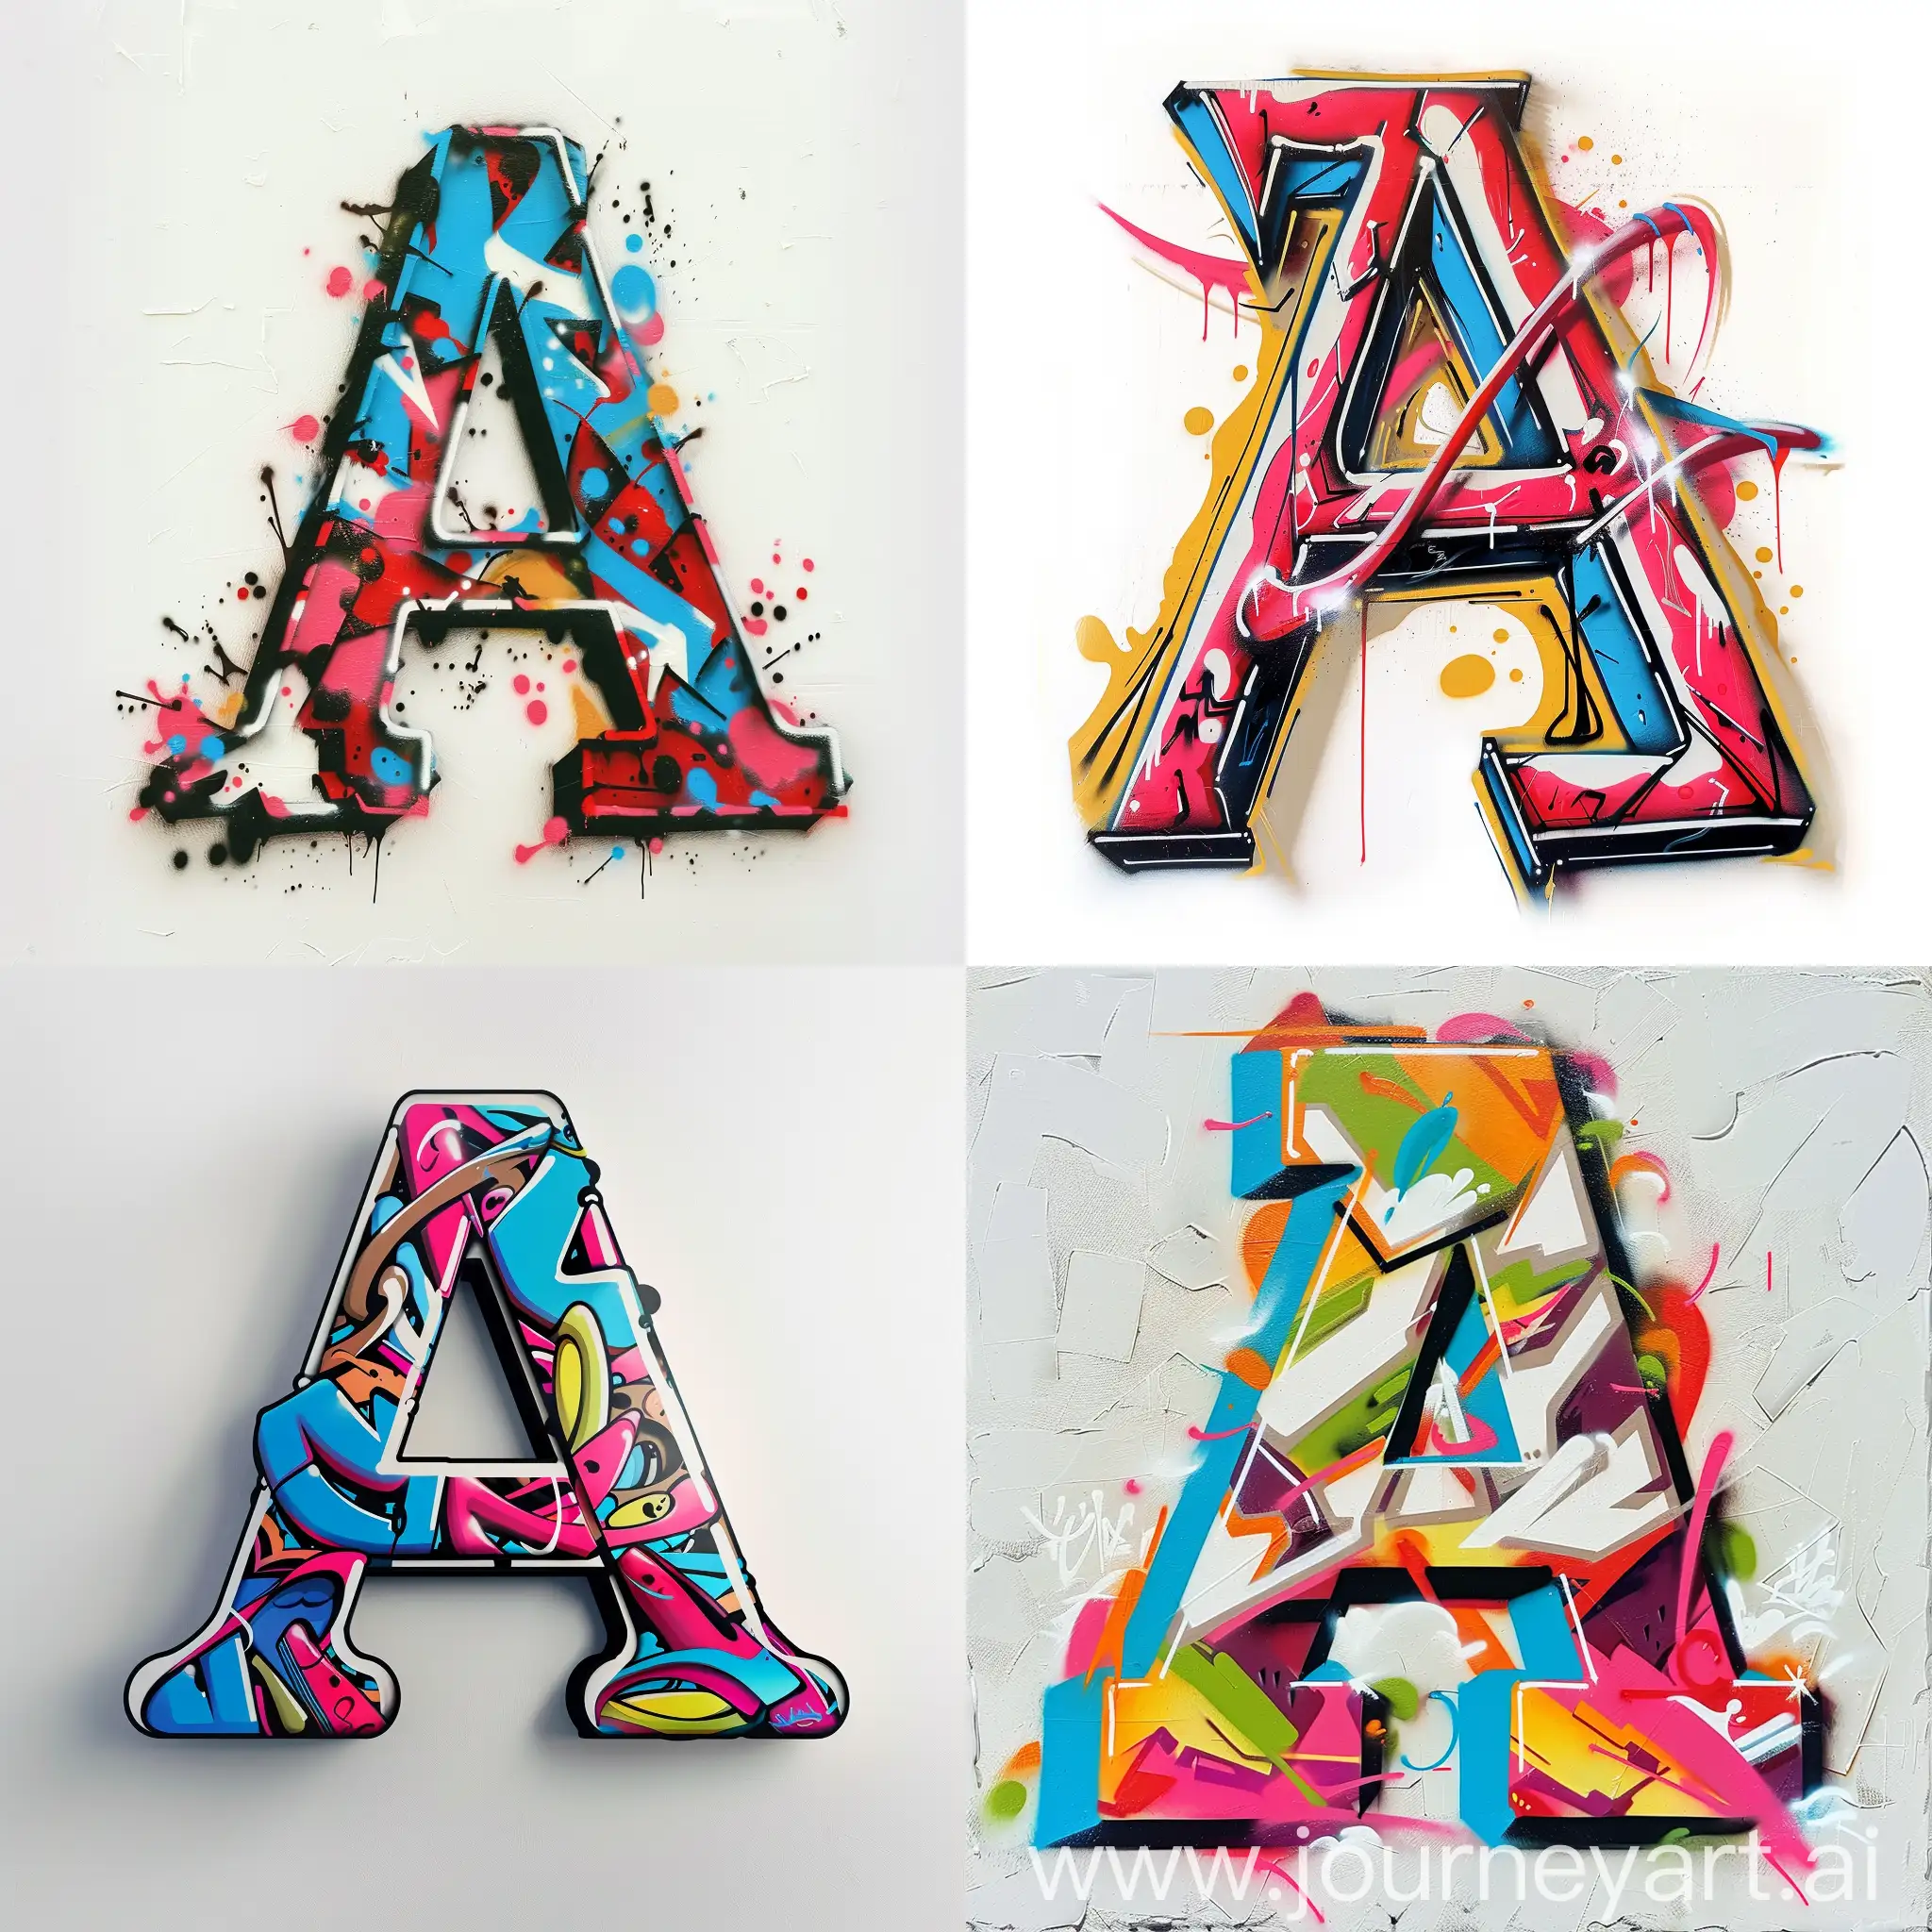 a graffiti art of the letter "A" on the white background